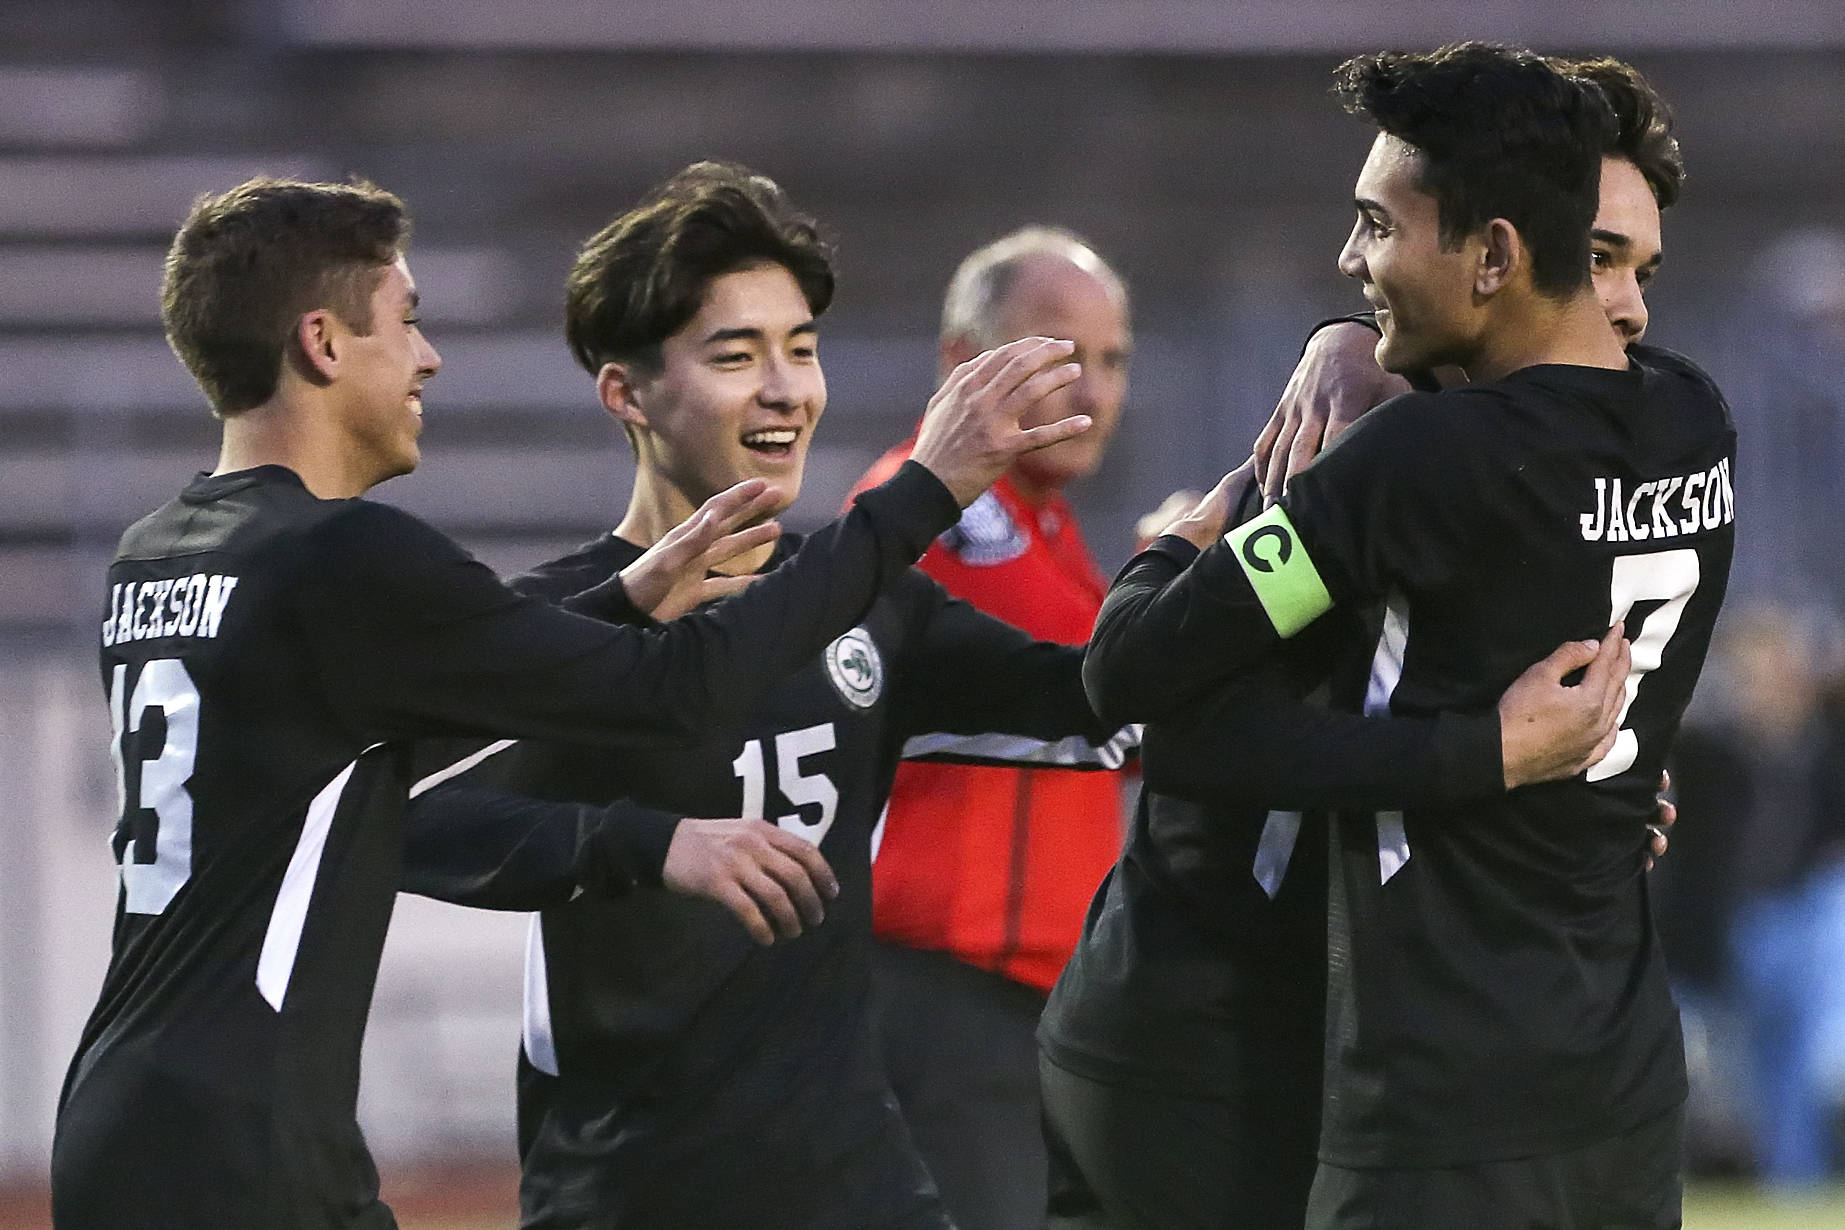 The Jackson boys soccer team will make its first-ever state semifinal appearance Friday night when it faces Puyallup for a spot in Saturday’s Class 4A state championship match. (Kevin Clark / The Herald)